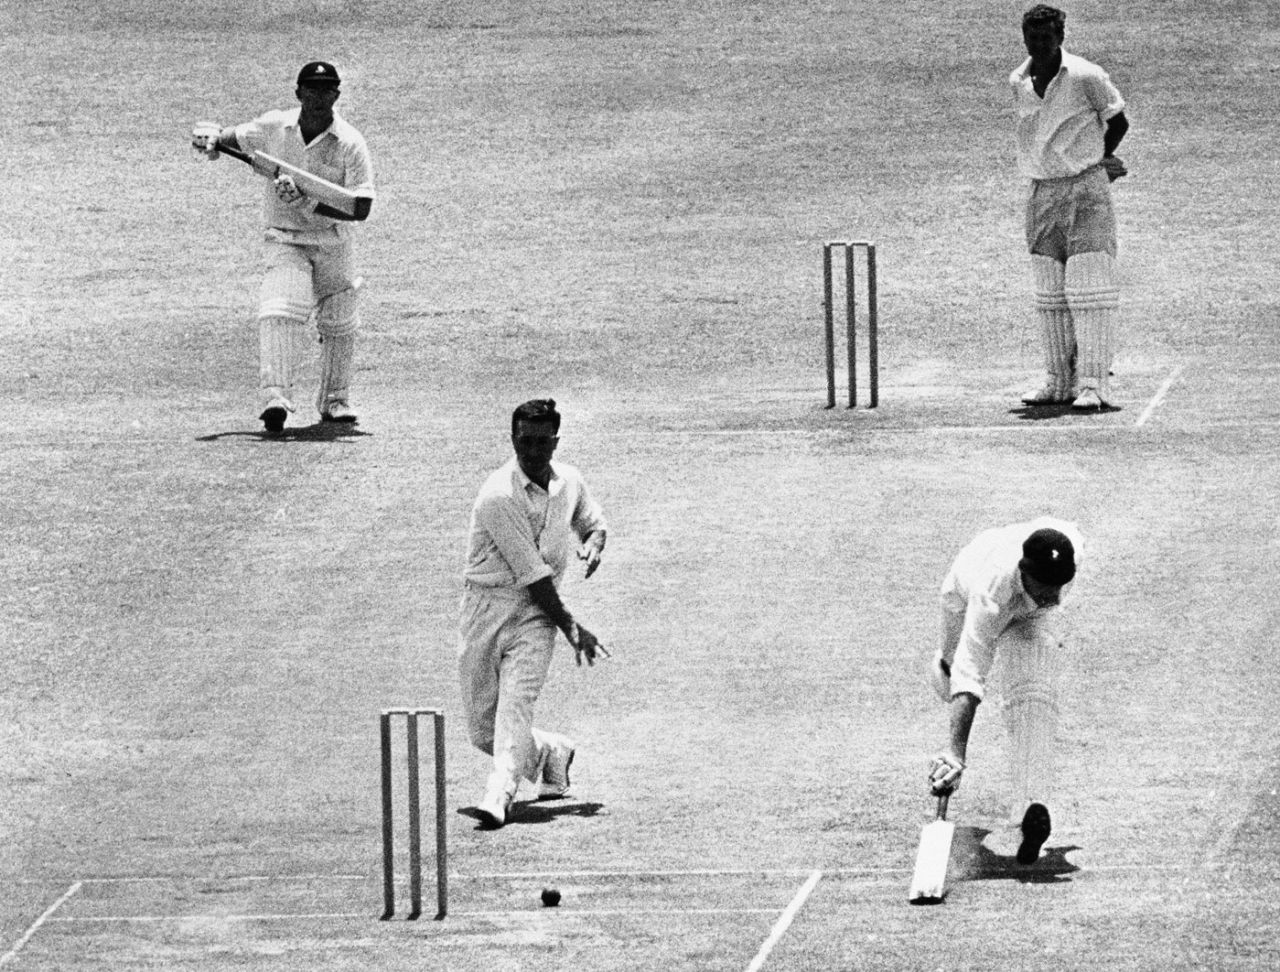 Fred Titmus tries to run out Graeme Pollock, South Africa v England, 3rd Test, Cape Town, 5th day, January 6, 1965